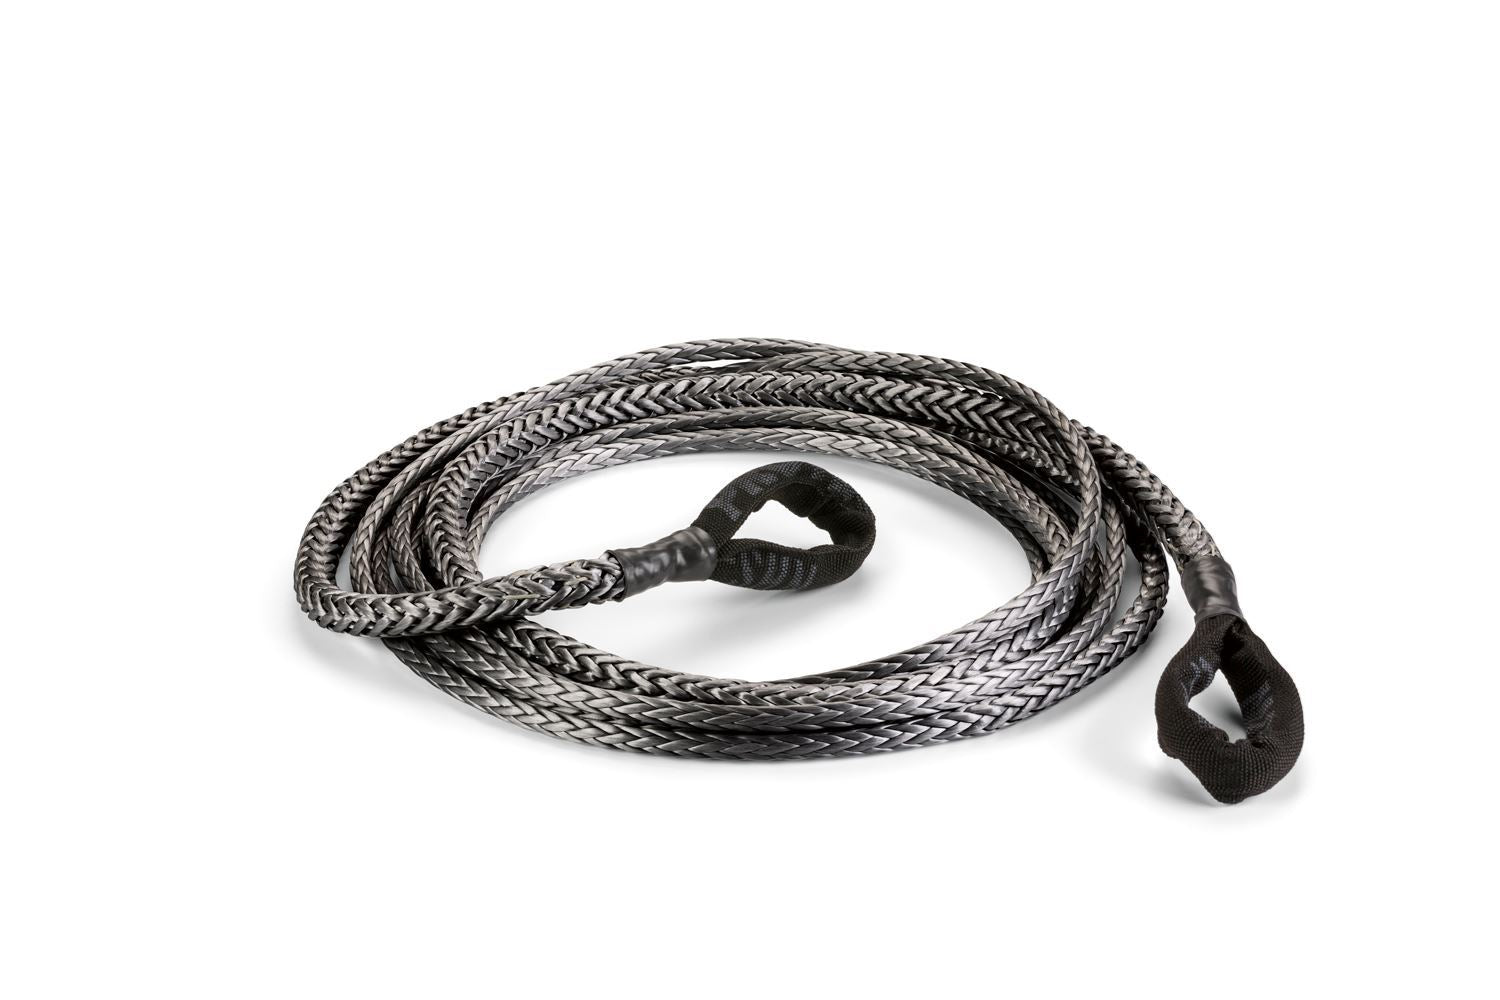 WARN Spydura Pro Synthetic Rope Extension, 25ft x 3/8in